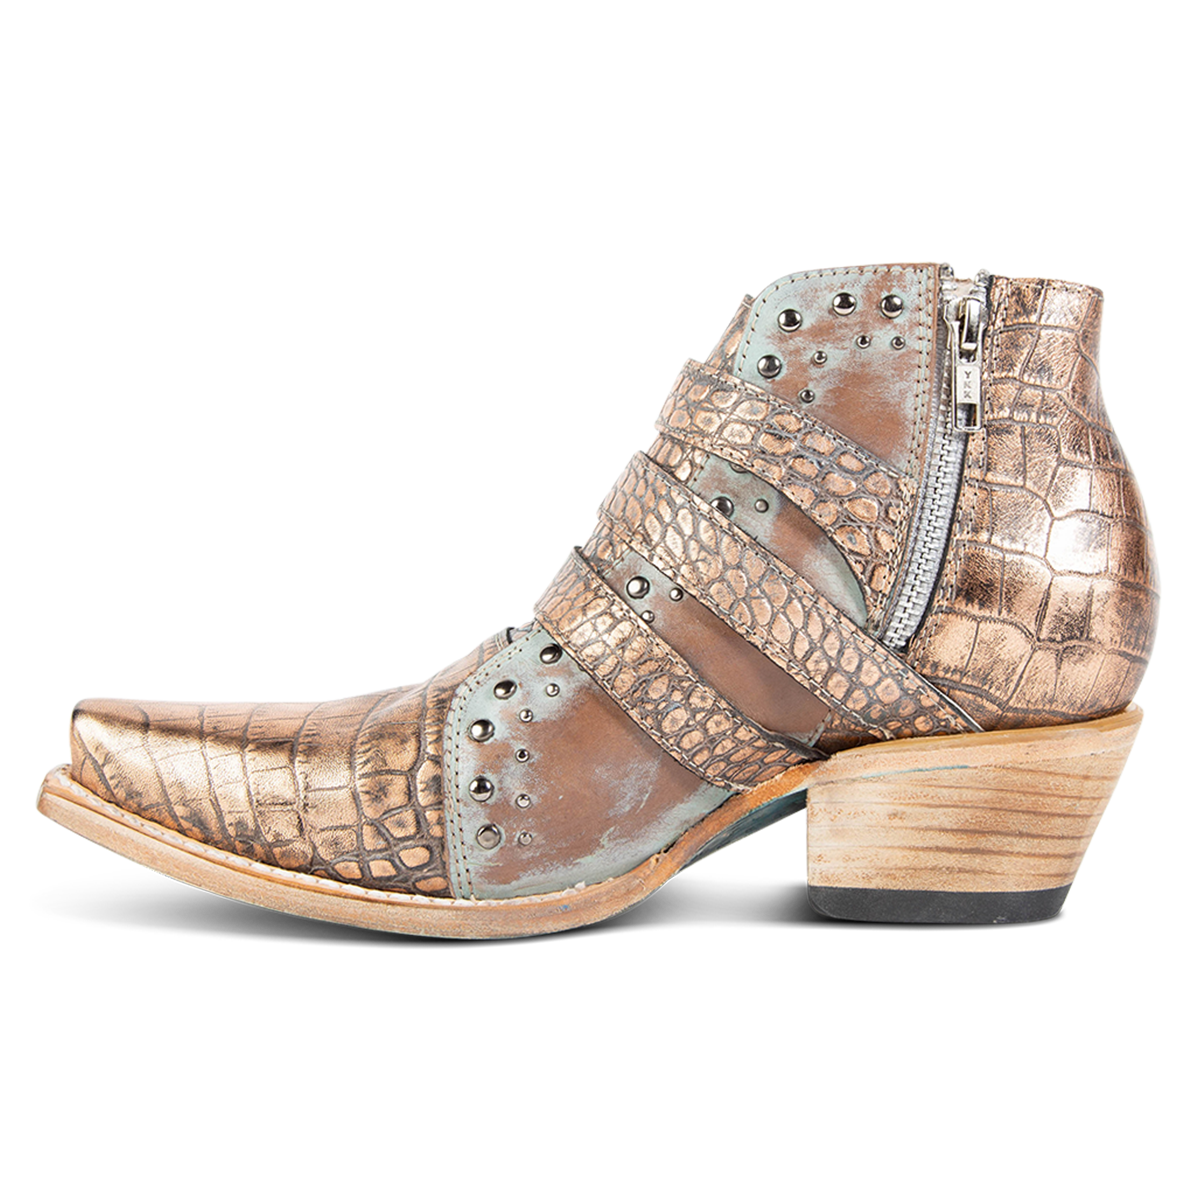 Inside view showing adjustable buckle straps and inside zip closure on FREEBIRD women's Whilhelmina blush croco western ankle bootie